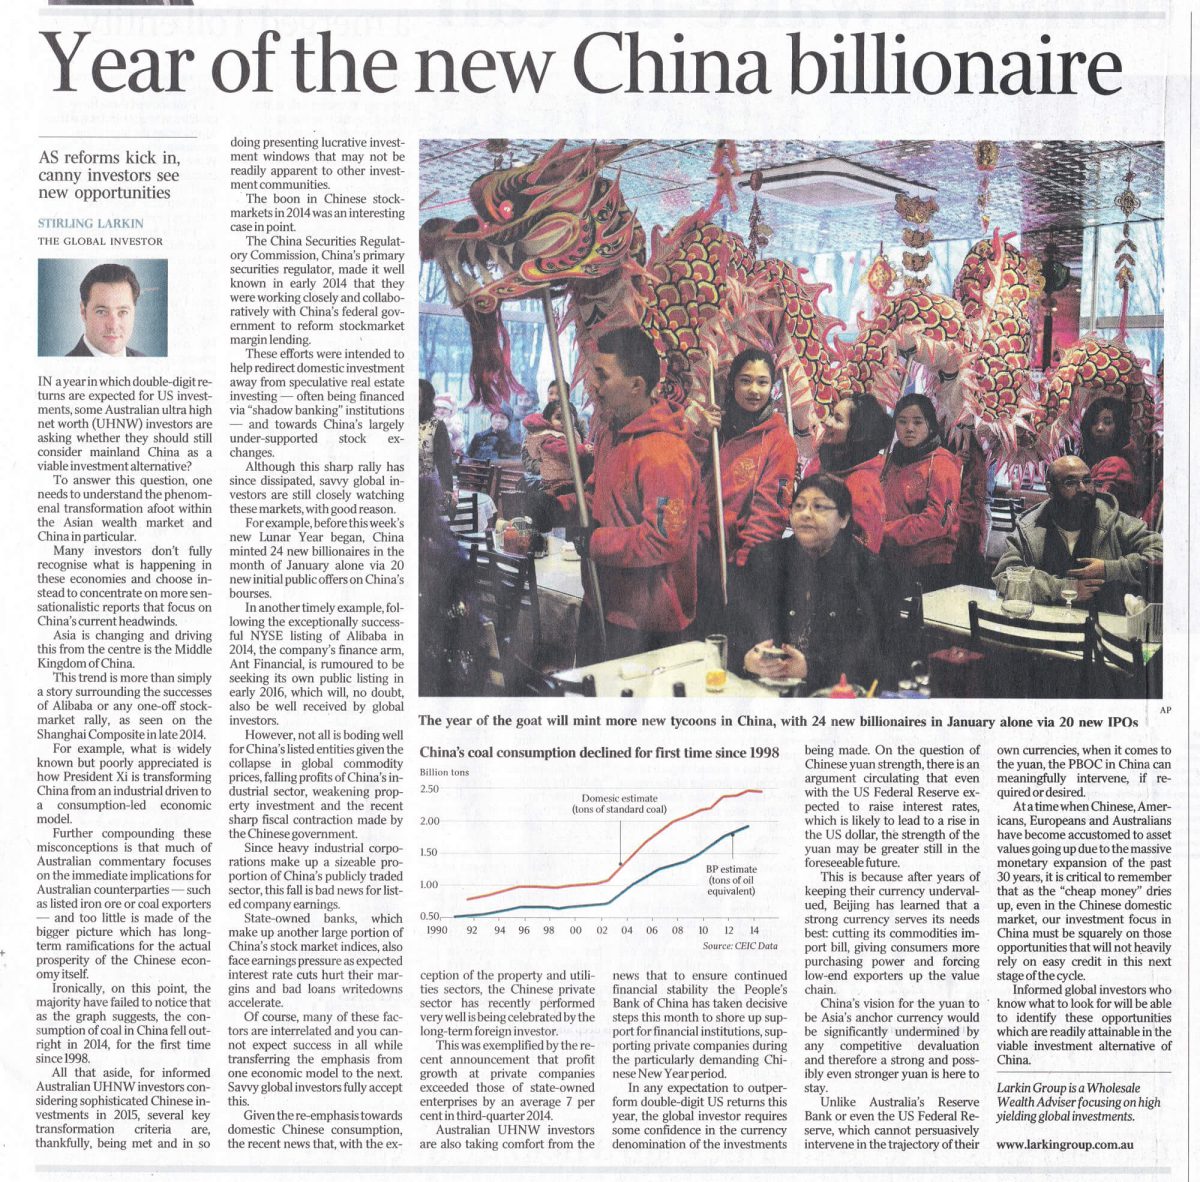 australian standfirst discusses wealth in china in 2015 in the australian newspaper